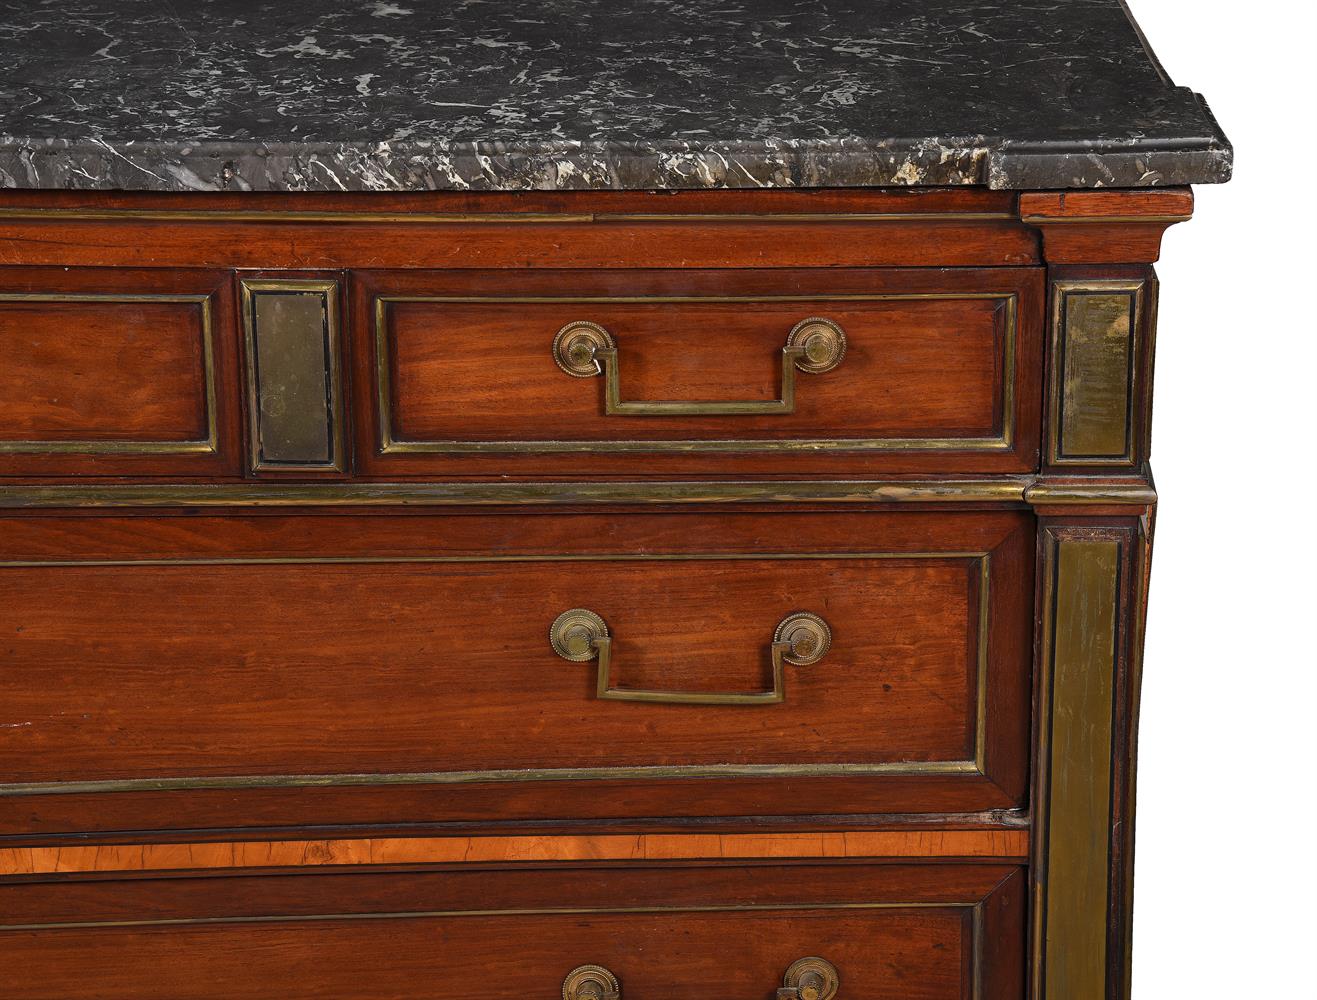 QUEEN MARY'S DIRECTOIRE MAHOGANY AND BRASS MOUNTED COMMODE, LATE 18TH/EARLY 19TH CENTURY - Image 6 of 7